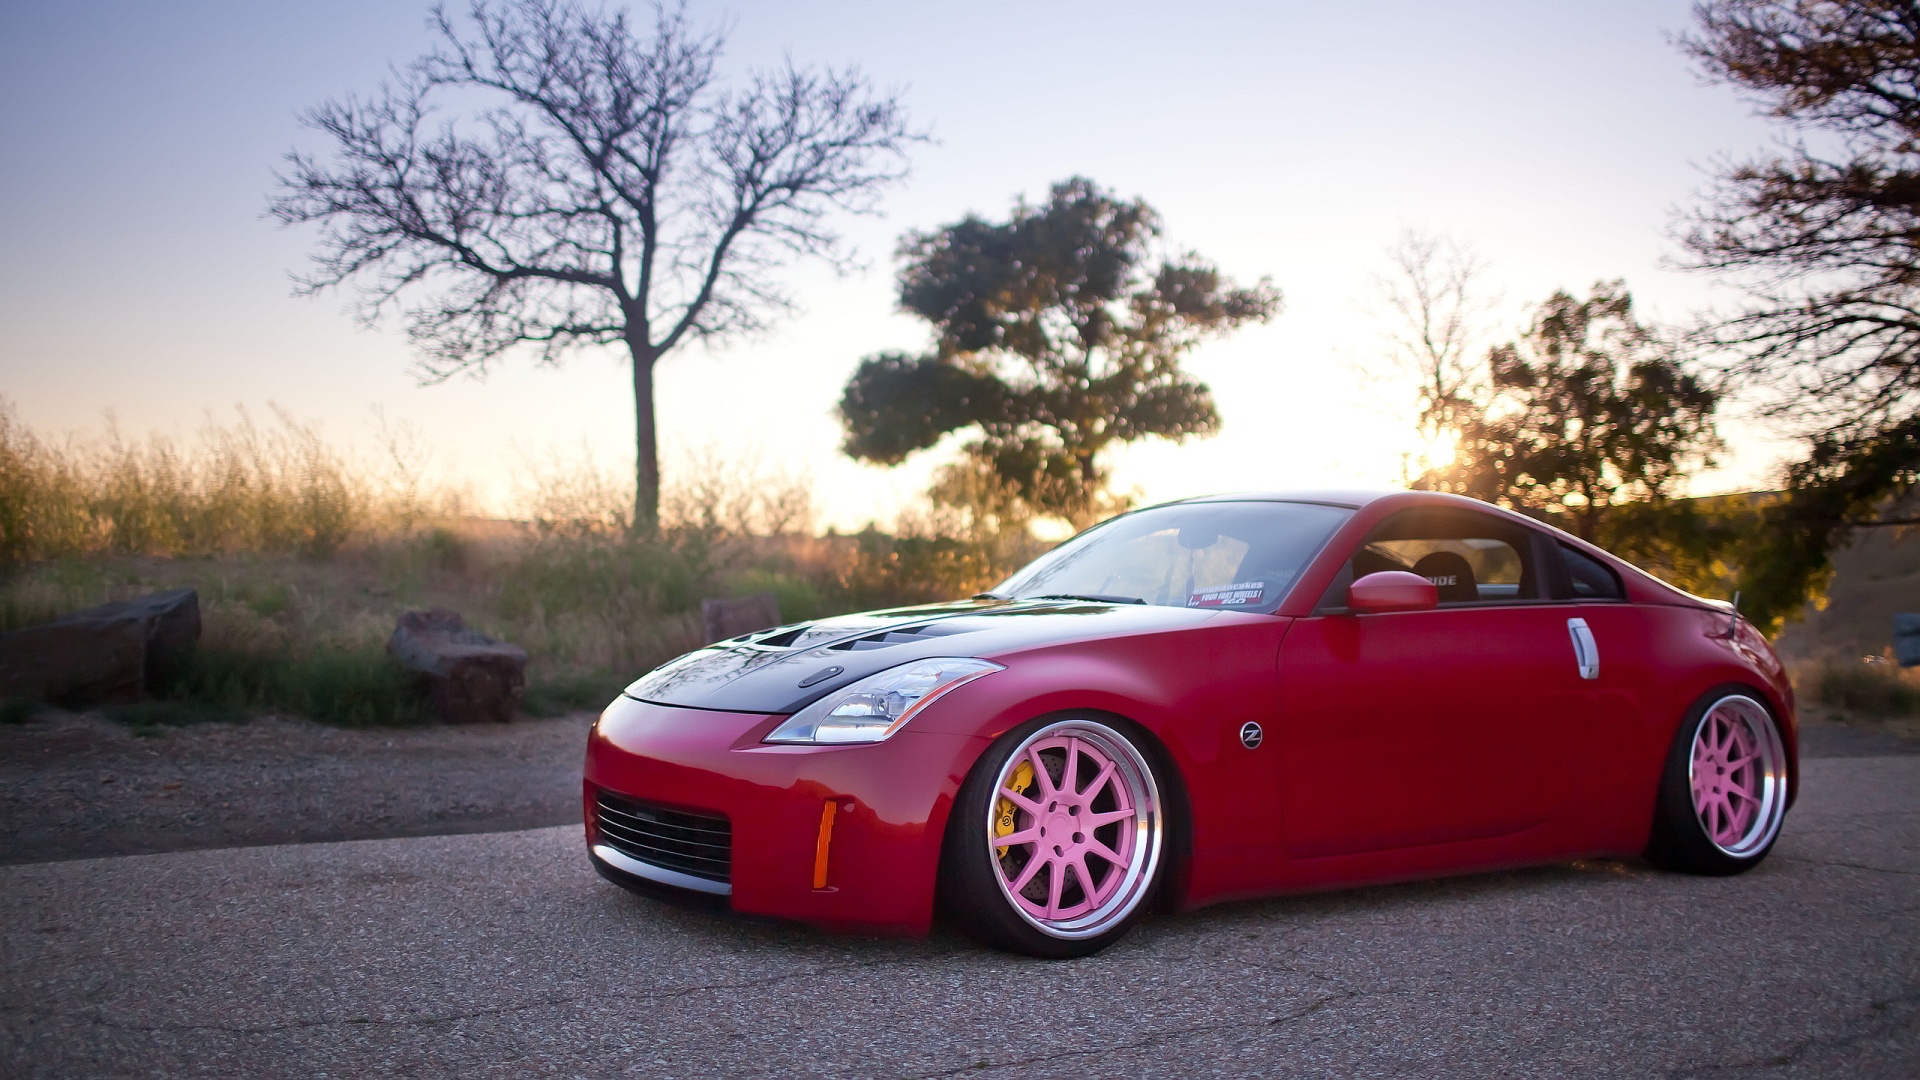 Amazing Description: The Wallpaper above is Modified Nissan 350z Wallpaper in